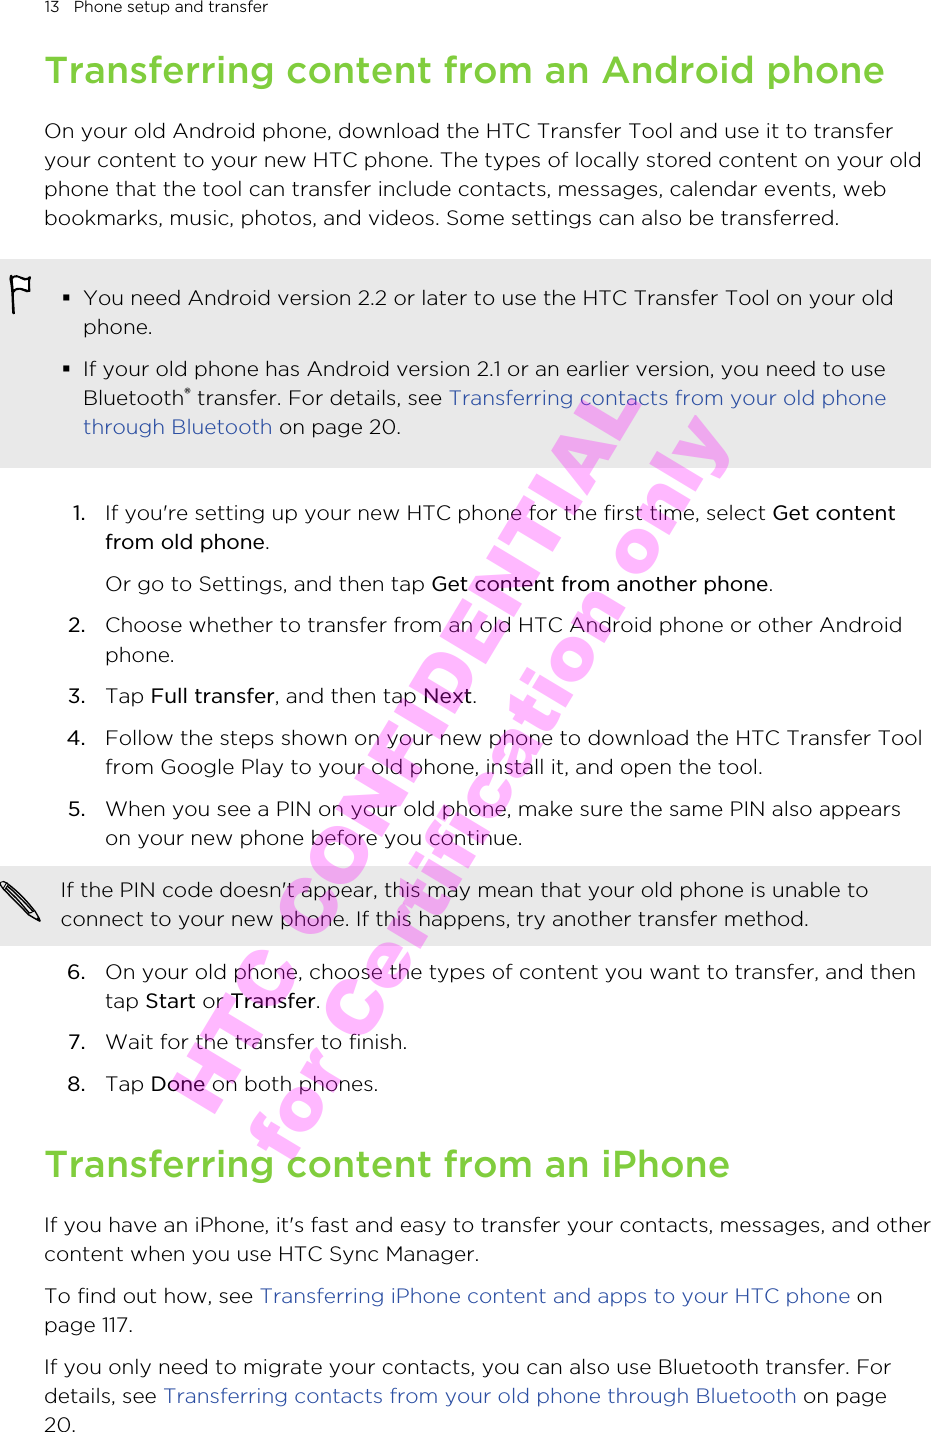 Transferring content from an Android phoneOn your old Android phone, download the HTC Transfer Tool and use it to transferyour content to your new HTC phone. The types of locally stored content on your oldphone that the tool can transfer include contacts, messages, calendar events, webbookmarks, music, photos, and videos. Some settings can also be transferred.§You need Android version 2.2 or later to use the HTC Transfer Tool on your oldphone.§If your old phone has Android version 2.1 or an earlier version, you need to useBluetooth® transfer. For details, see Transferring contacts from your old phonethrough Bluetooth on page 20.1. If you&apos;re setting up your new HTC phone for the first time, select Get contentfrom old phone. Or go to Settings, and then tap Get content from another phone.2. Choose whether to transfer from an old HTC Android phone or other Androidphone.3. Tap Full transfer, and then tap Next.4. Follow the steps shown on your new phone to download the HTC Transfer Toolfrom Google Play to your old phone, install it, and open the tool.5. When you see a PIN on your old phone, make sure the same PIN also appearson your new phone before you continue. If the PIN code doesn&apos;t appear, this may mean that your old phone is unable toconnect to your new phone. If this happens, try another transfer method.6. On your old phone, choose the types of content you want to transfer, and thentap Start or Transfer.7. Wait for the transfer to finish.8. Tap Done on both phones.Transferring content from an iPhoneIf you have an iPhone, it&apos;s fast and easy to transfer your contacts, messages, and othercontent when you use HTC Sync Manager.To find out how, see Transferring iPhone content and apps to your HTC phone onpage 117.If you only need to migrate your contacts, you can also use Bluetooth transfer. Fordetails, see Transferring contacts from your old phone through Bluetooth on page20.13   Phone setup and transferHTC CONFIDENTIAL for Certification only